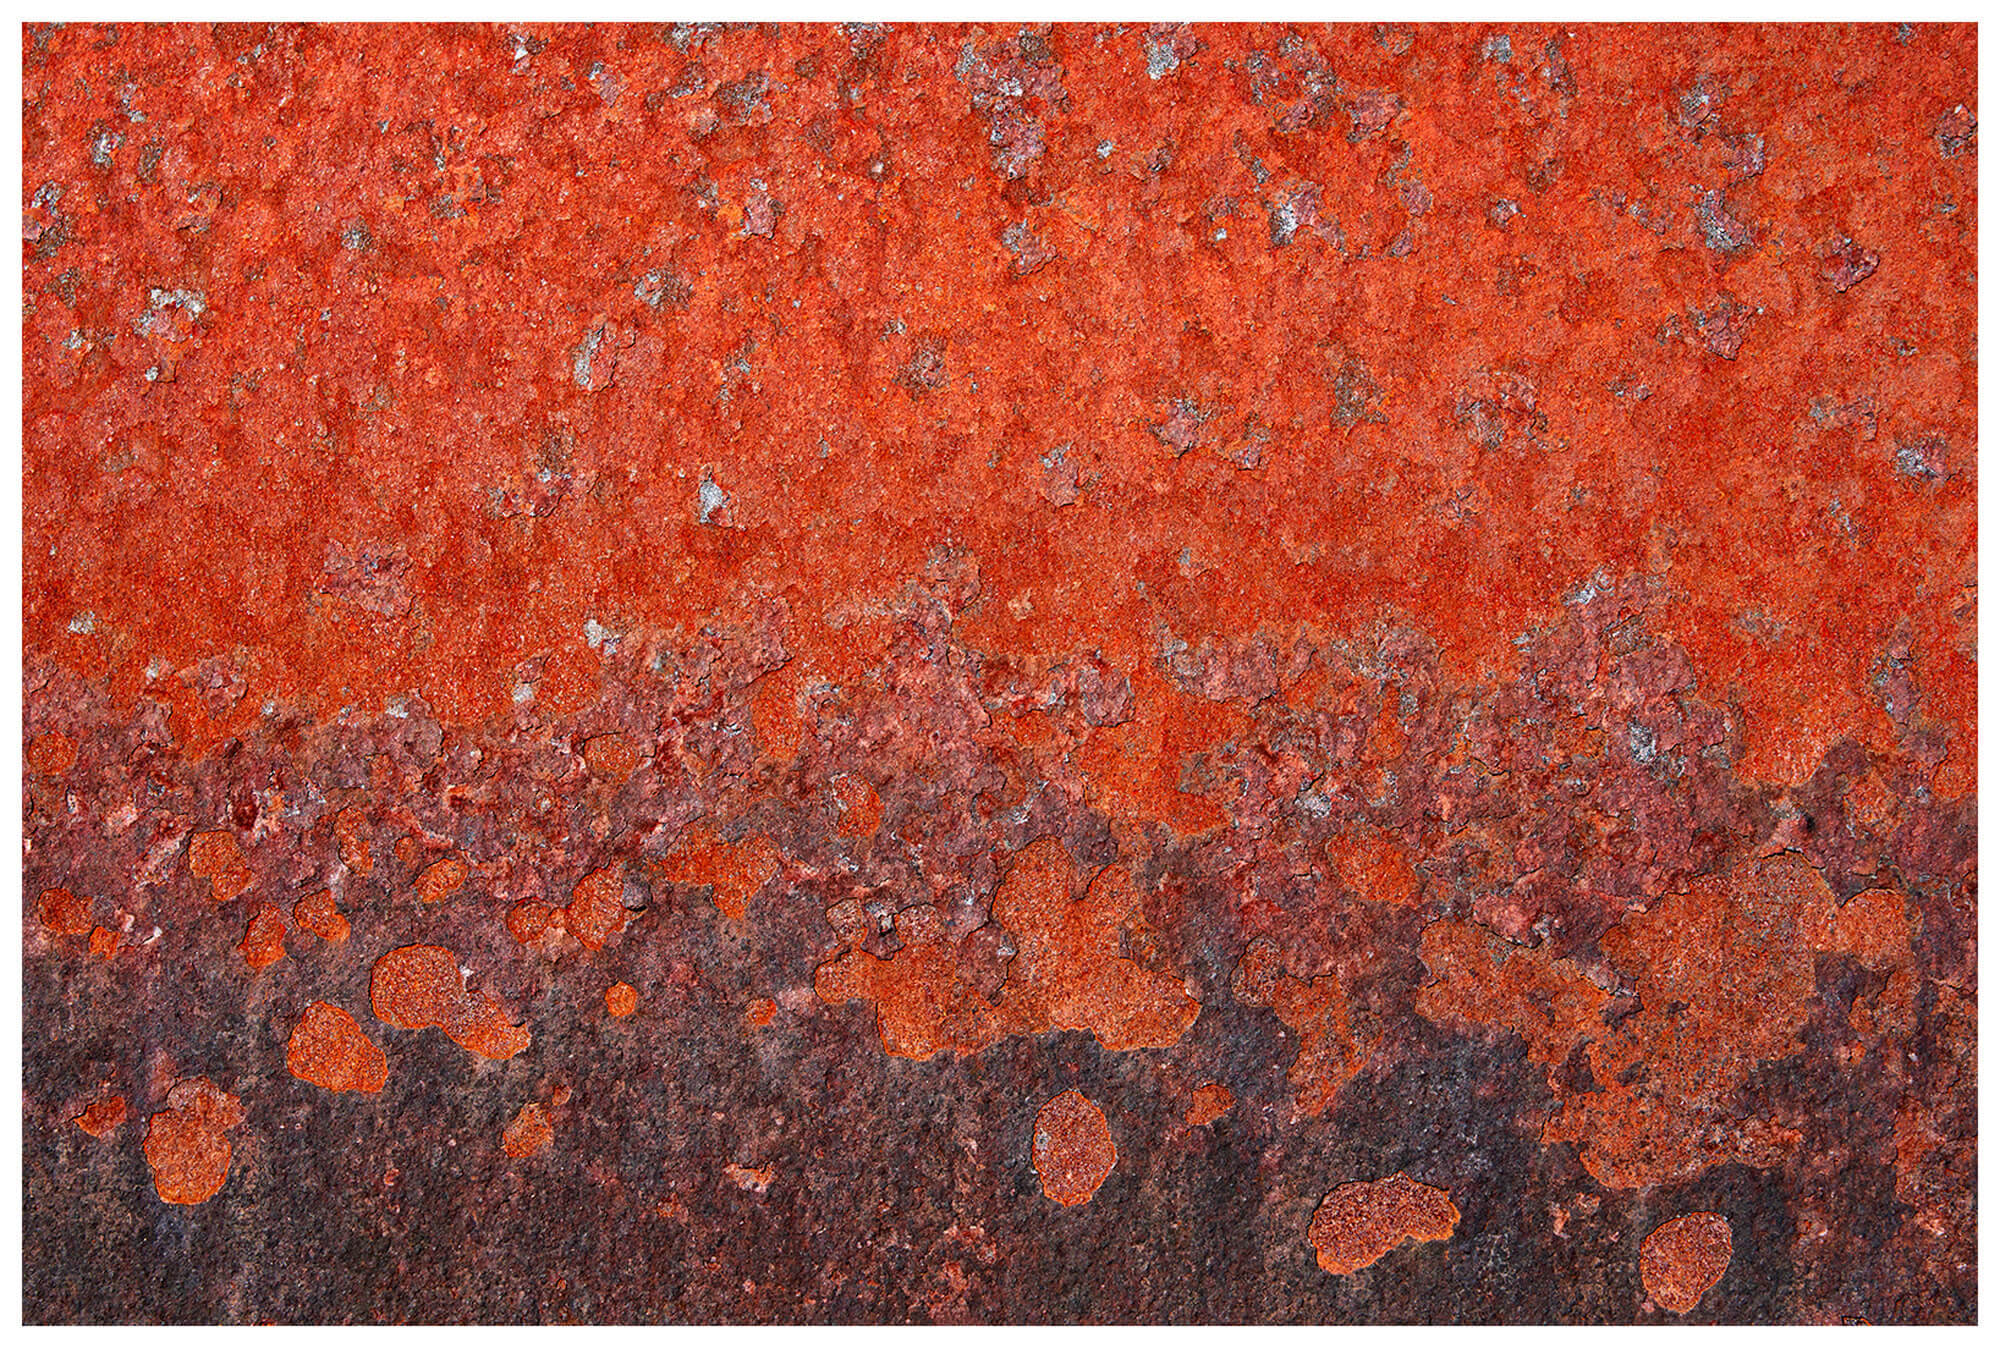 Rust abstracts from the whaling station